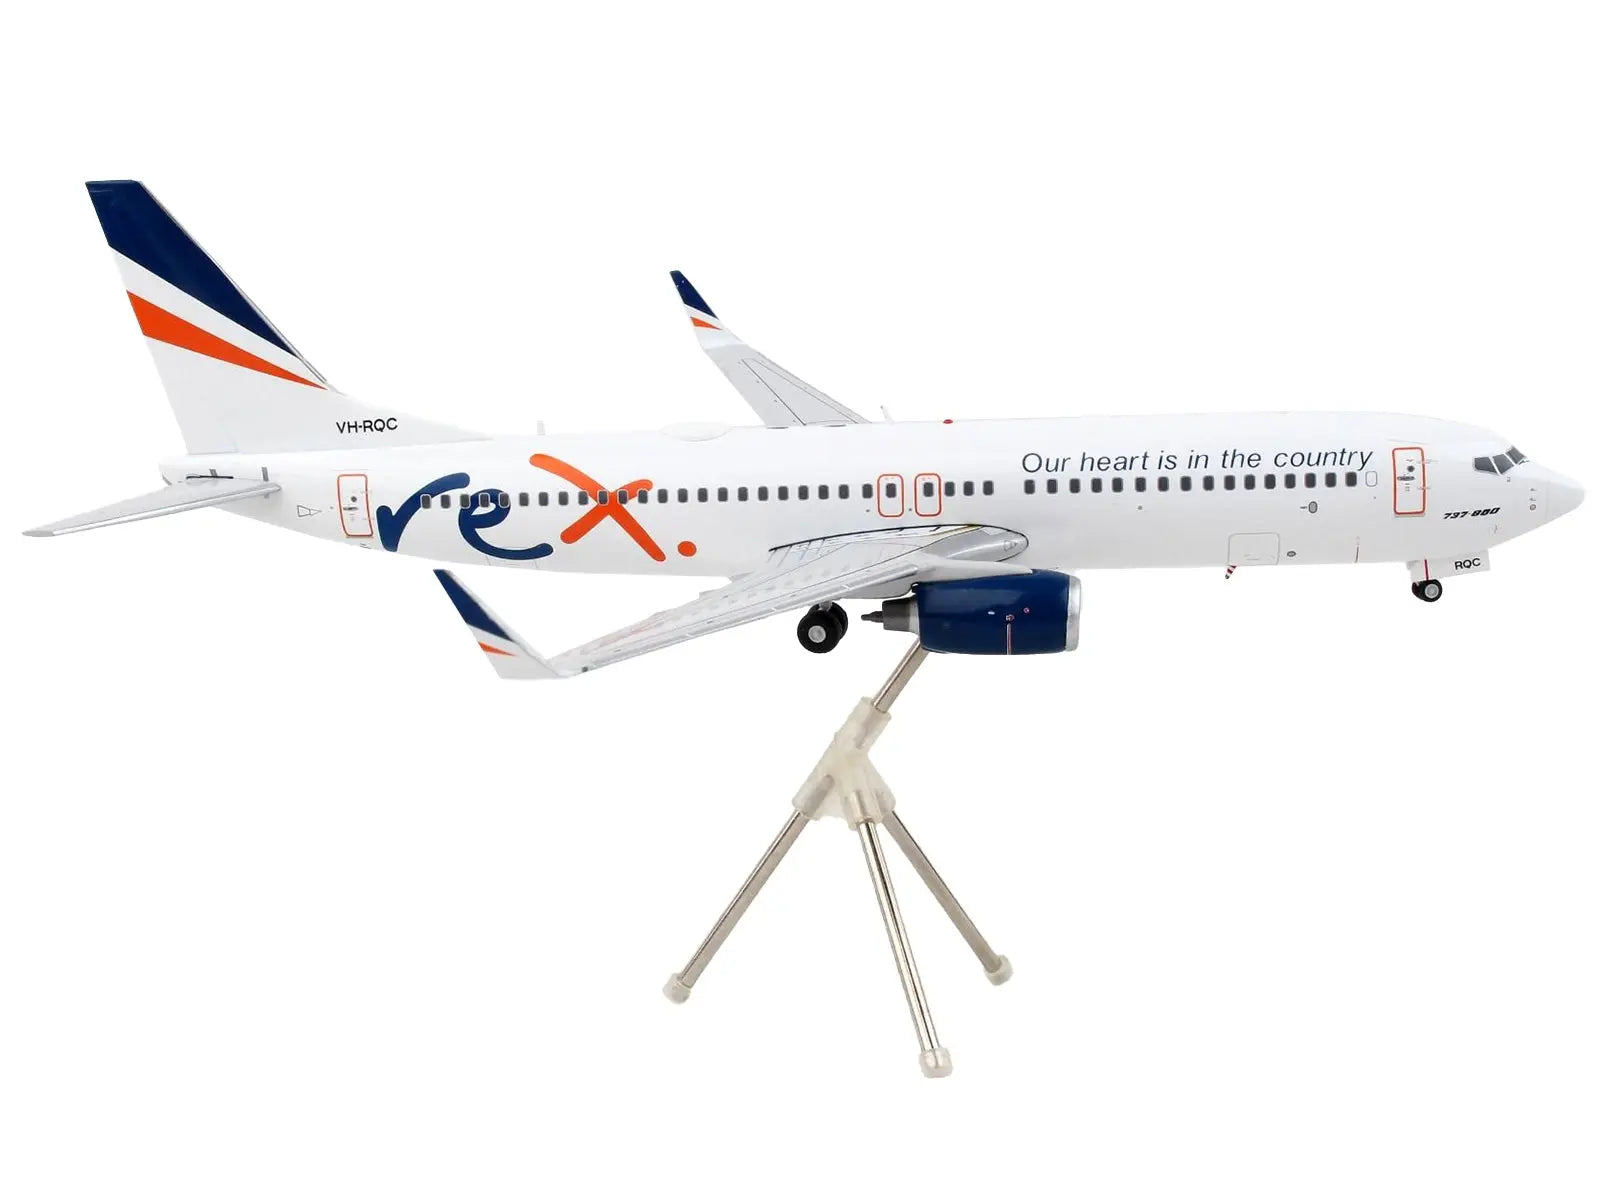 Boeing 737-800 Commercial Aircraft "Regional Express Rex Airlines" White with Striped Tail "Gemini 200" Series 1/200 Diecast Model Airplane by GeminiJets - DREAMLAND DIE CAST